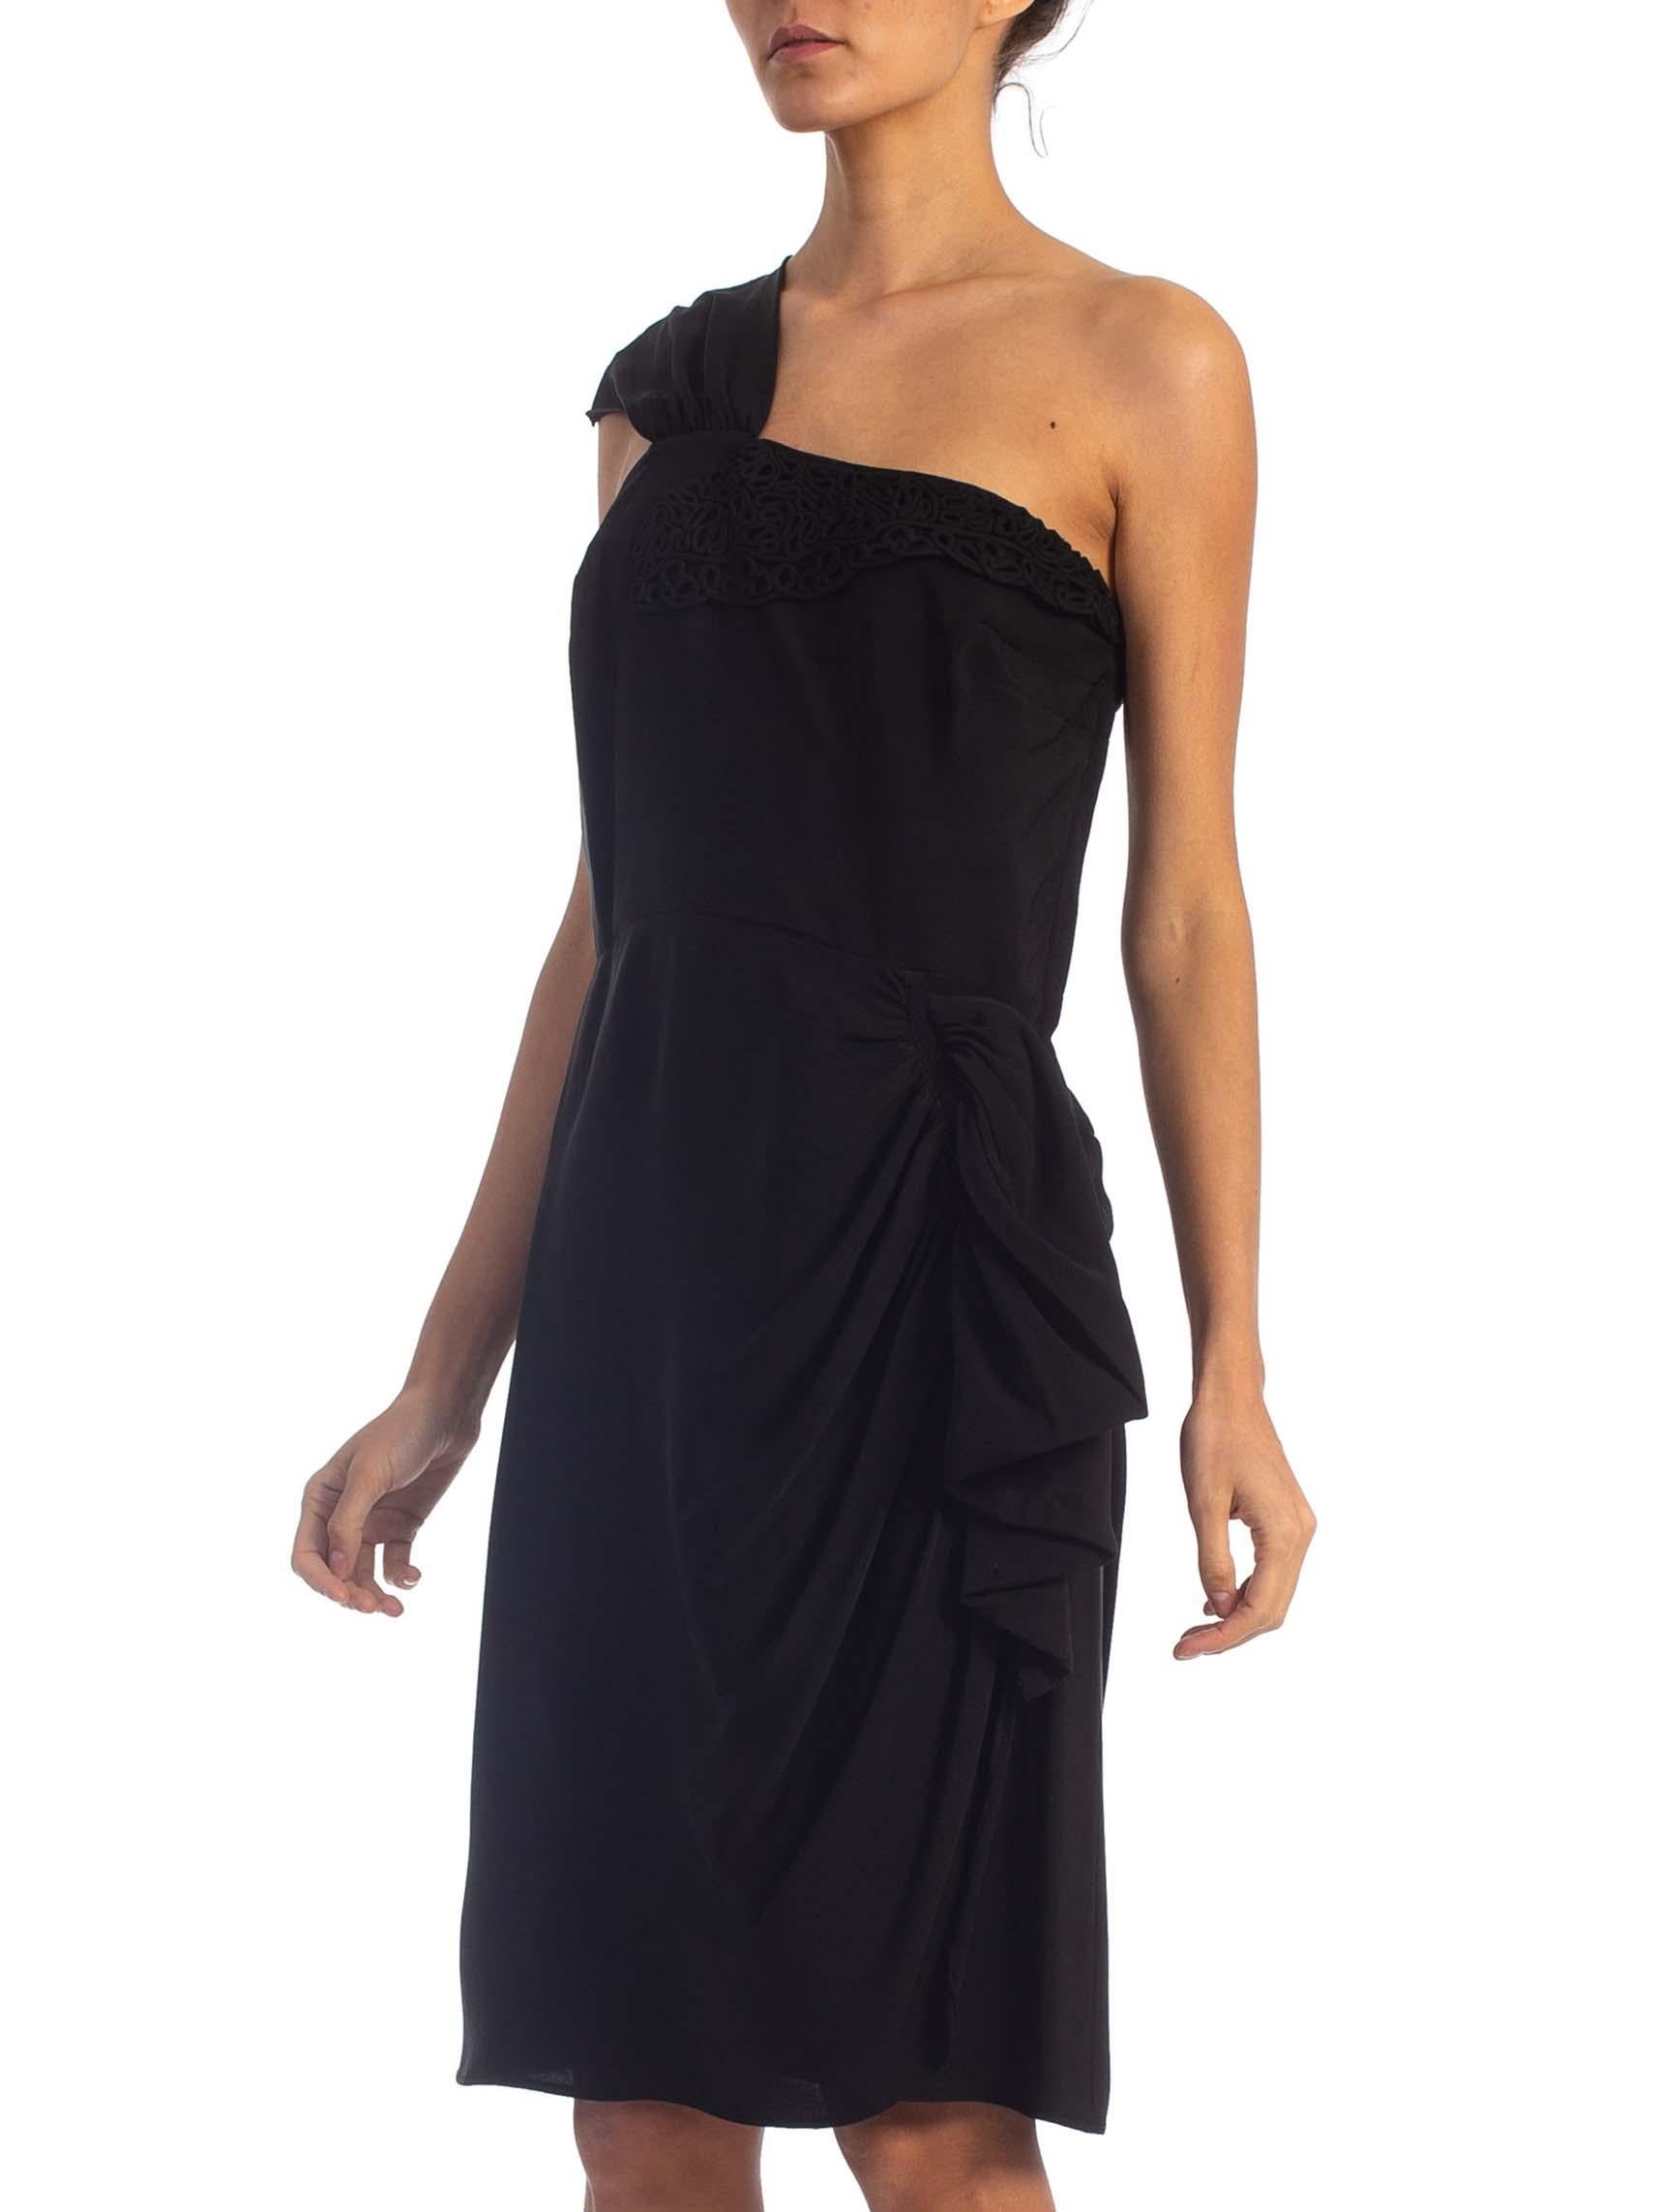 1940'S Black Rayon Crepe One Shoulder Draped Peplum Cocktail Dress In Excellent Condition For Sale In New York, NY